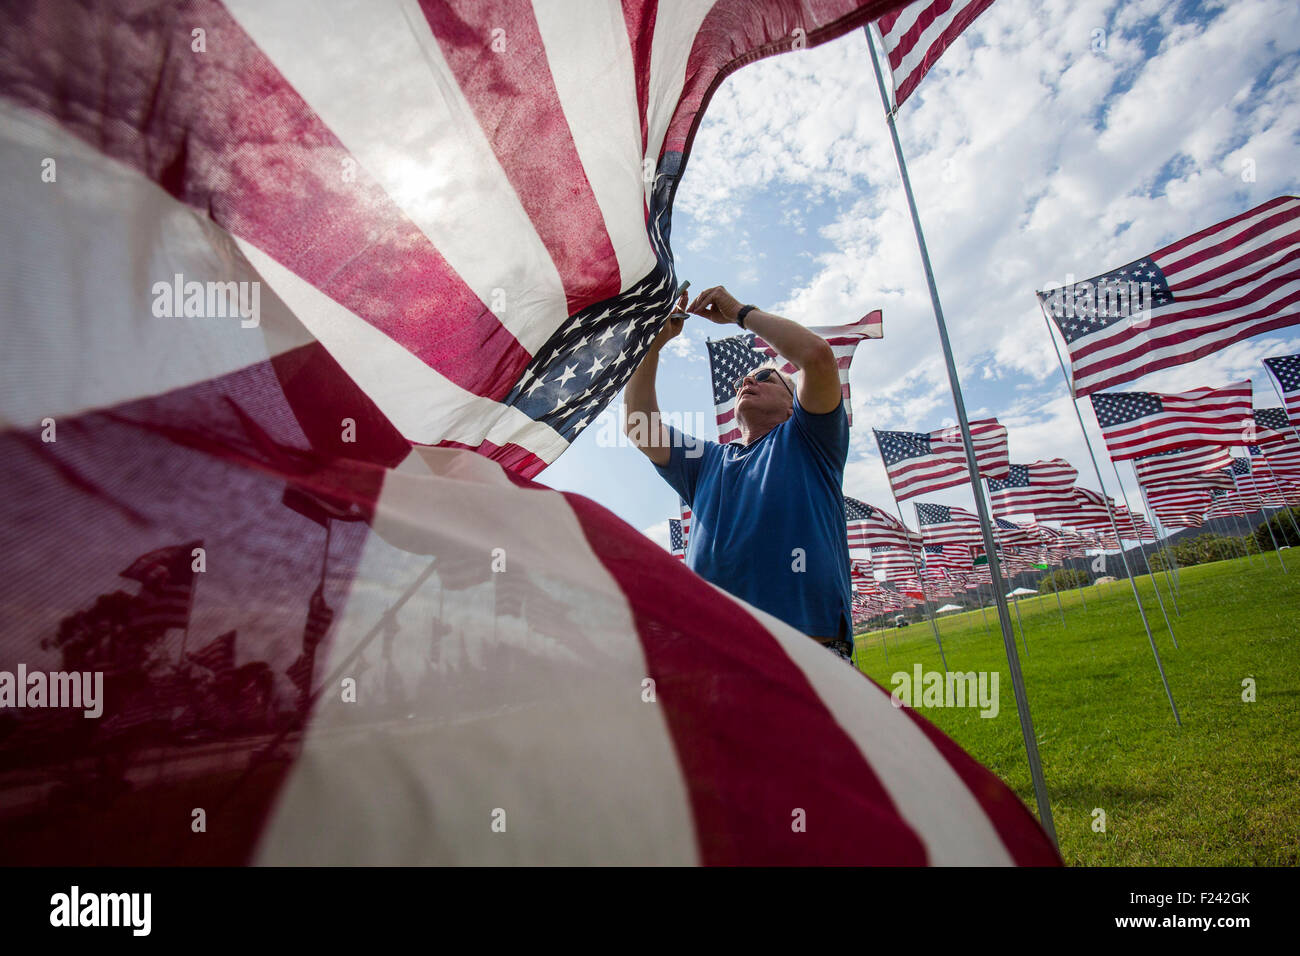 Los Angeles, California, USA. 10th Sep, 2015. A man erects a US flag to honor the victims of the September 11, 2001 attacks in New York, at the campus of Pepperdine University in Malibu, California, Sept. 10, 2015. Credit:  Zhao Hanrong/Xinhua/Alamy Live News Stock Photo